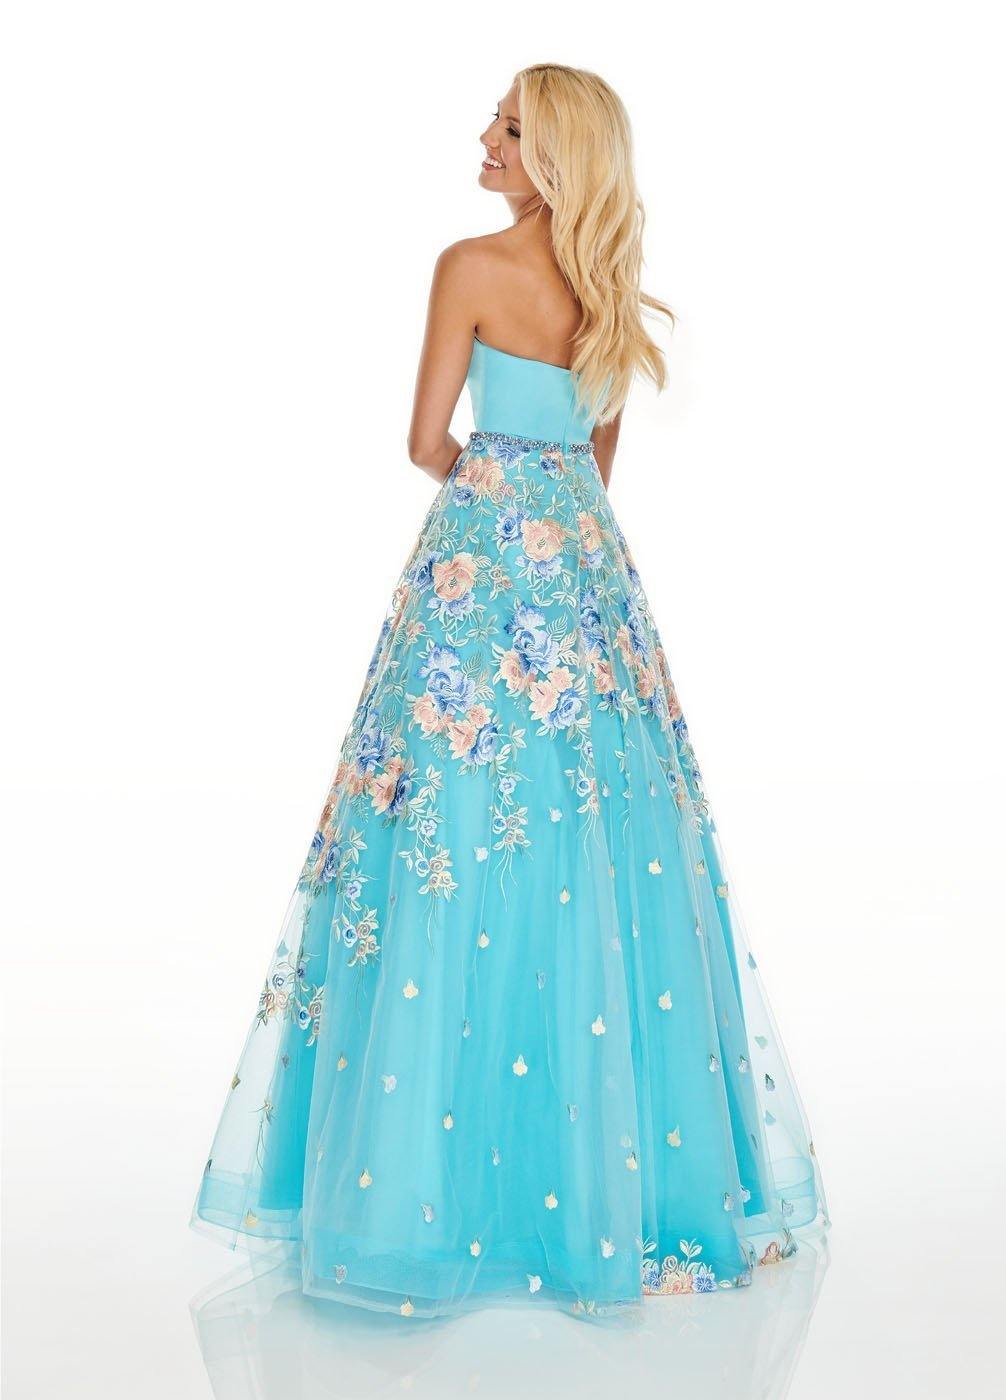 Aqua/Multi Prom Long Dress Ball Gown for $499.99 – The Dress Outlet